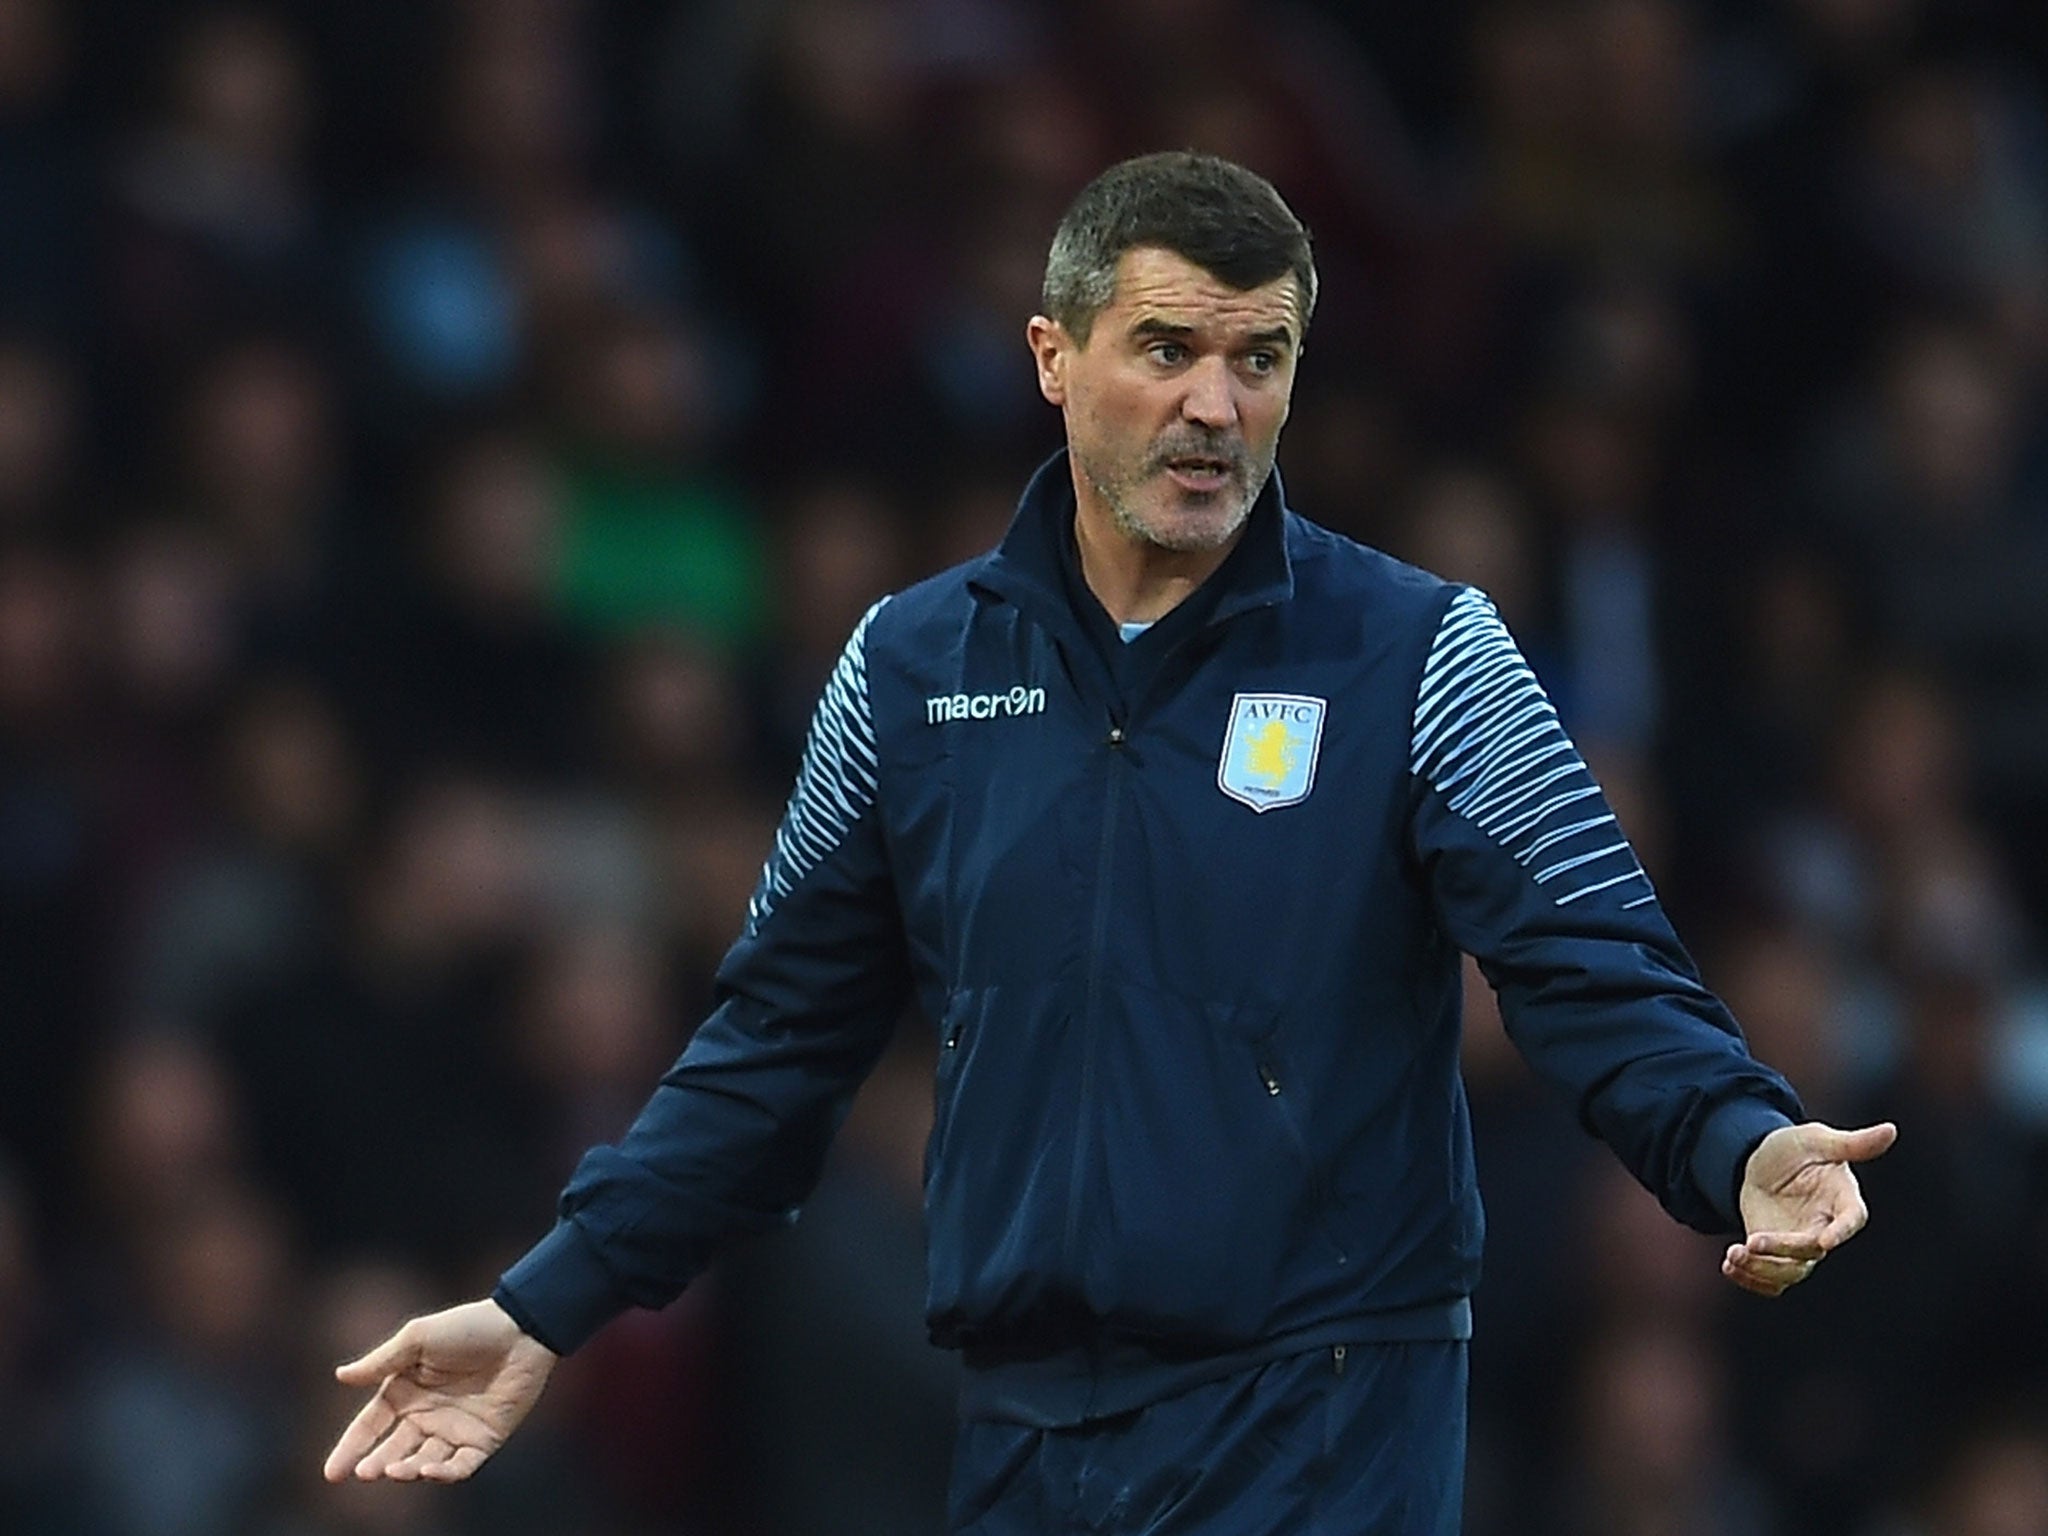 Aston Villa and Republic of Ireland assistant manager Roy Keane